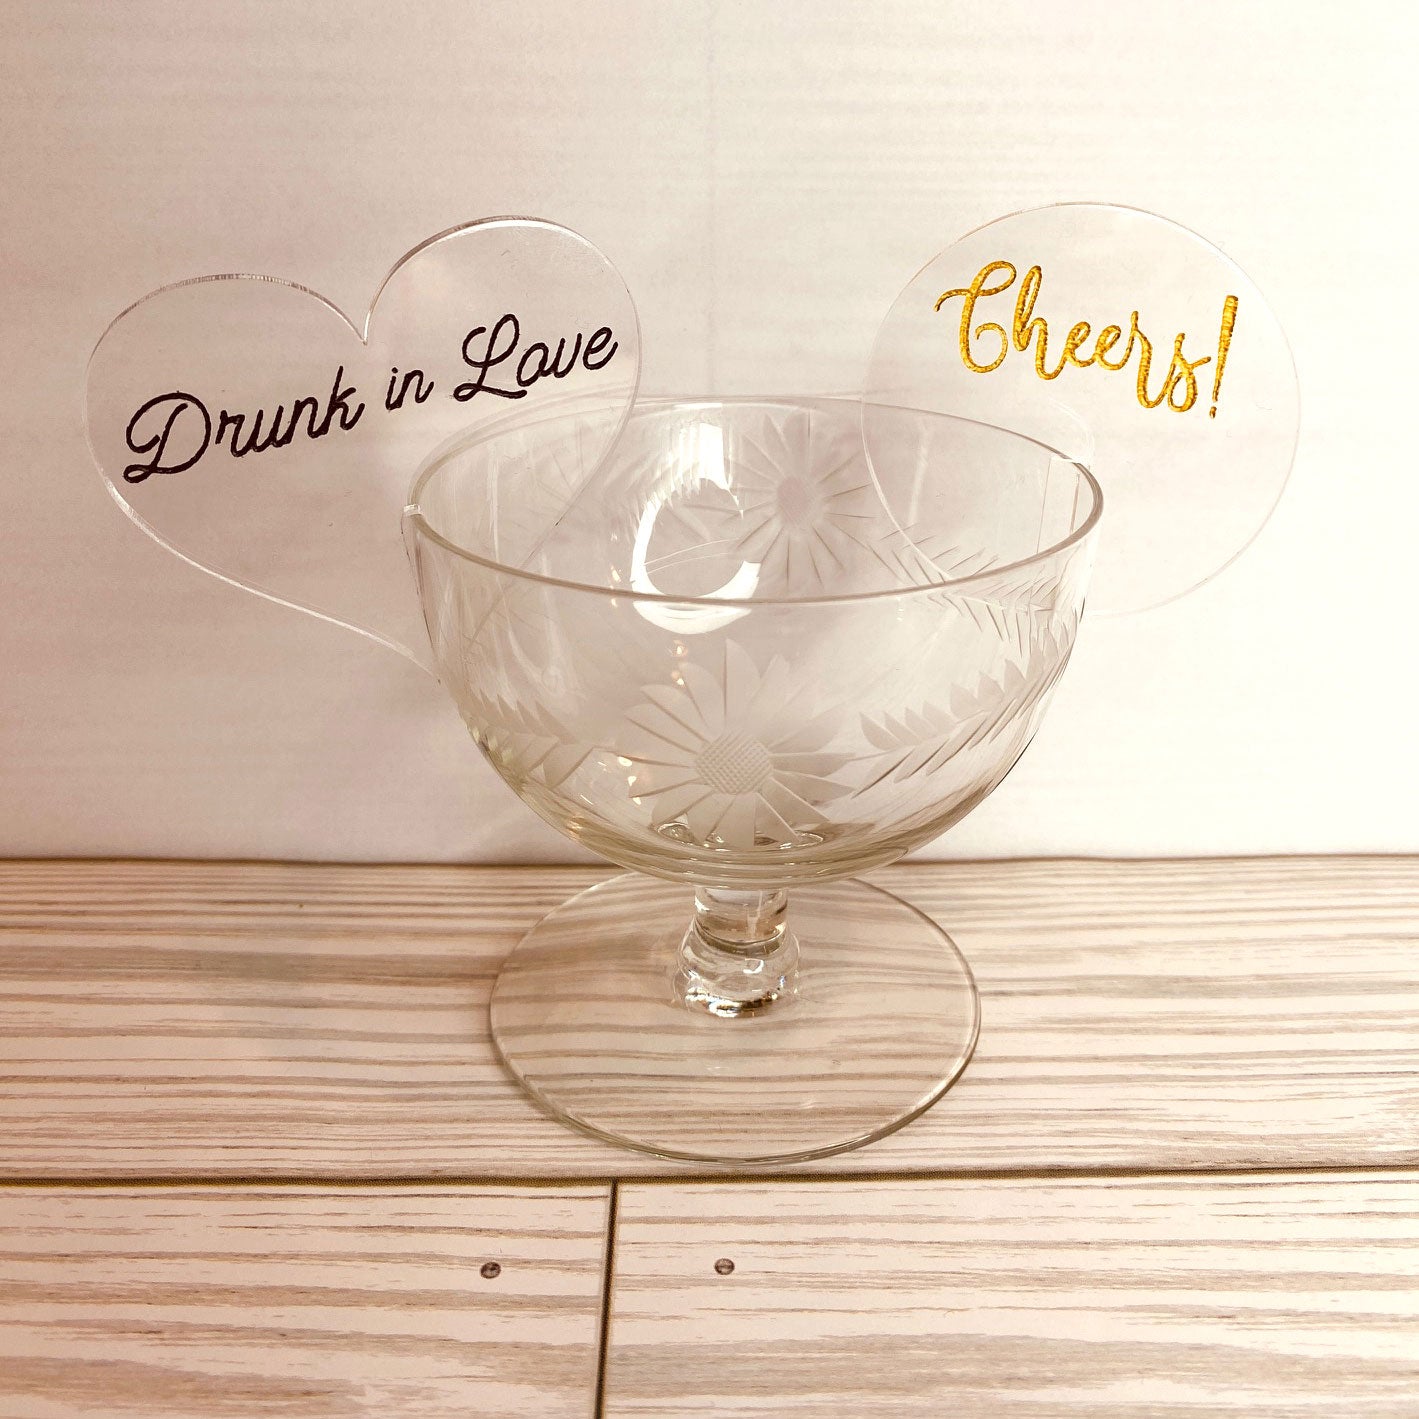 Digital SVG Crown Champagne Glass Markers, Drink Markers, Wedding Favors,  Wine Glass Markers. NON-COMMERCIAL Use Only. 